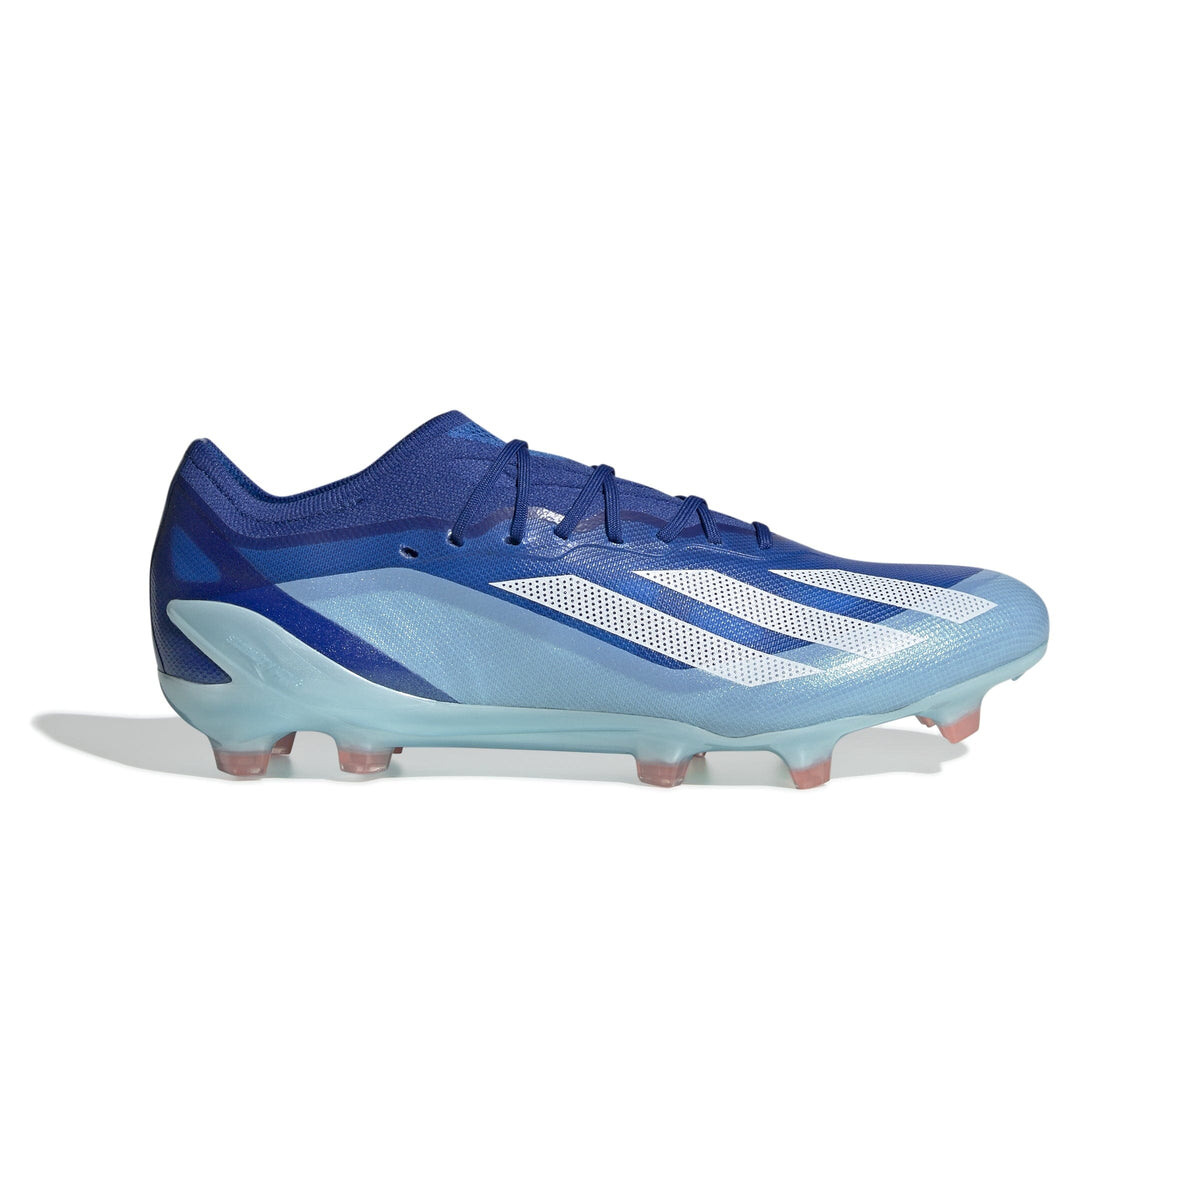 adidas Unisex X Crazyfast.1 Firm Ground Cleats | GY7416 Soccer Cleats Adidas 8.5 BRIGHT ROYAL/FTWR WHITE/SOLAR RED 